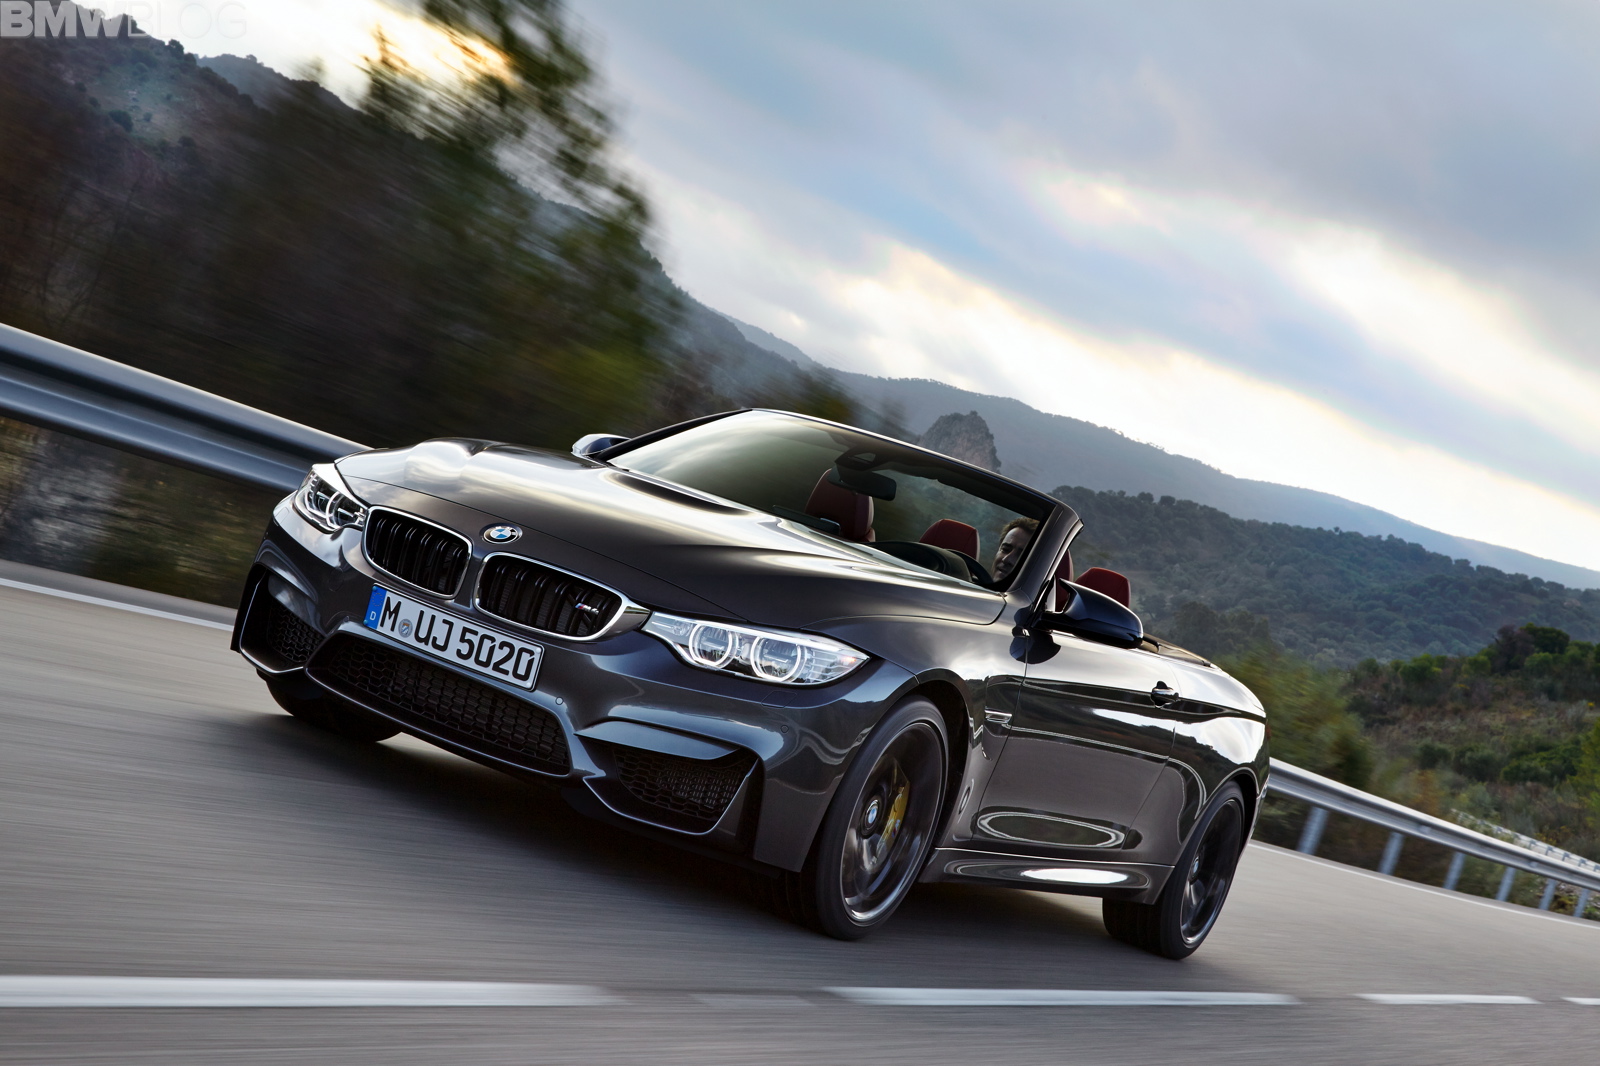 2015 bmw m4 convertible images